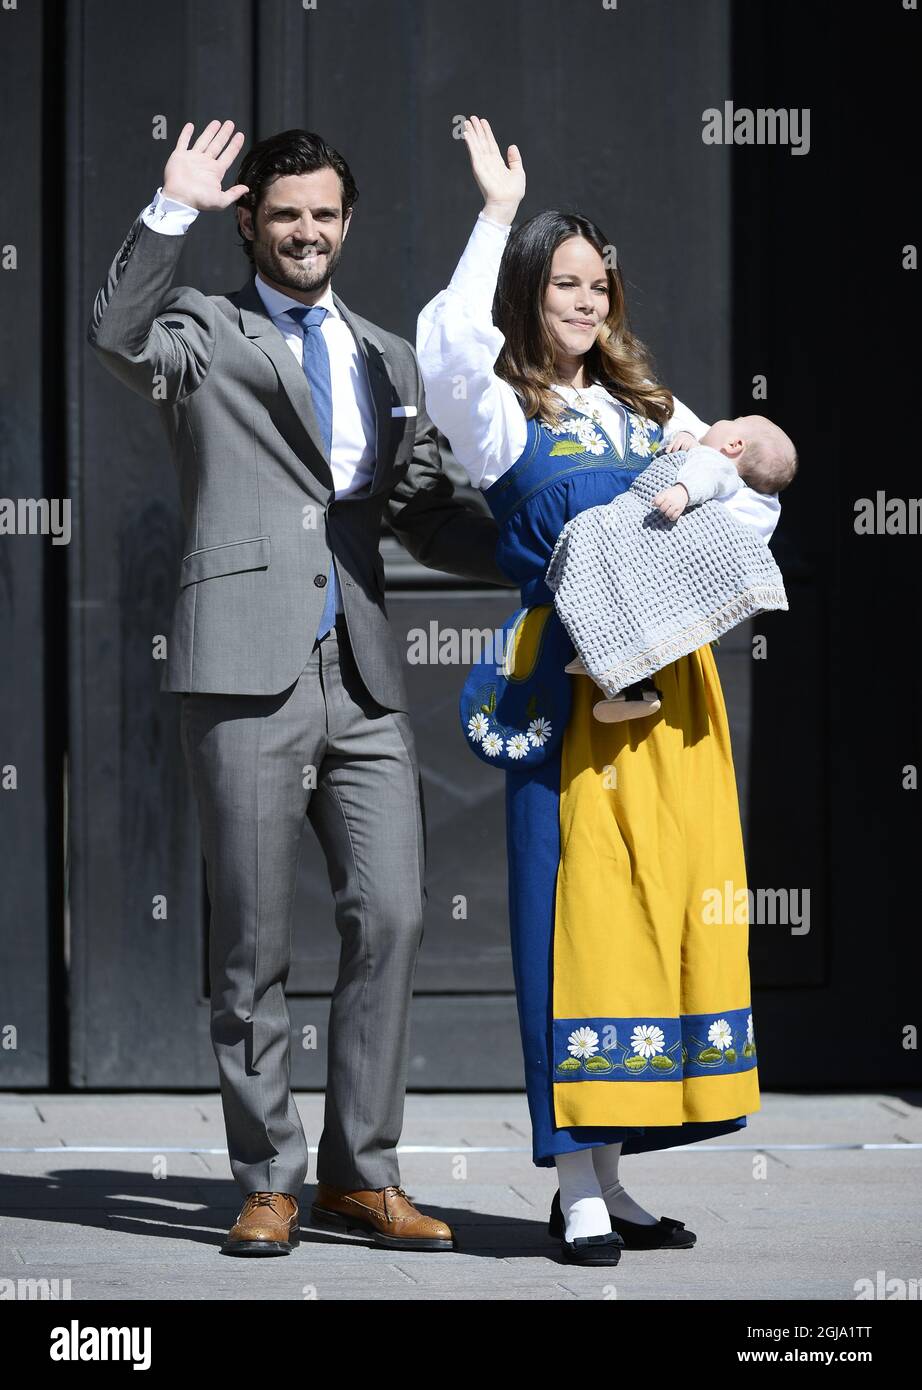 STOCKHOLM 2016-06-06 Prince Carl Philip, Prince Alexander and Princess Sofia open the doors to the Royal Palace in Stockholm for the 'Open Palace' event during the National Day of Sweden celebrations in Stockholm, Sweden, June 6, 2016. During 'Open Palace' the public is invited to visit the Royal Palace in Stockholm and take part of guided tours. Photo Maja Suslin / TT / Kod 10300 ** SWEDEN OUT ** Stock Photo